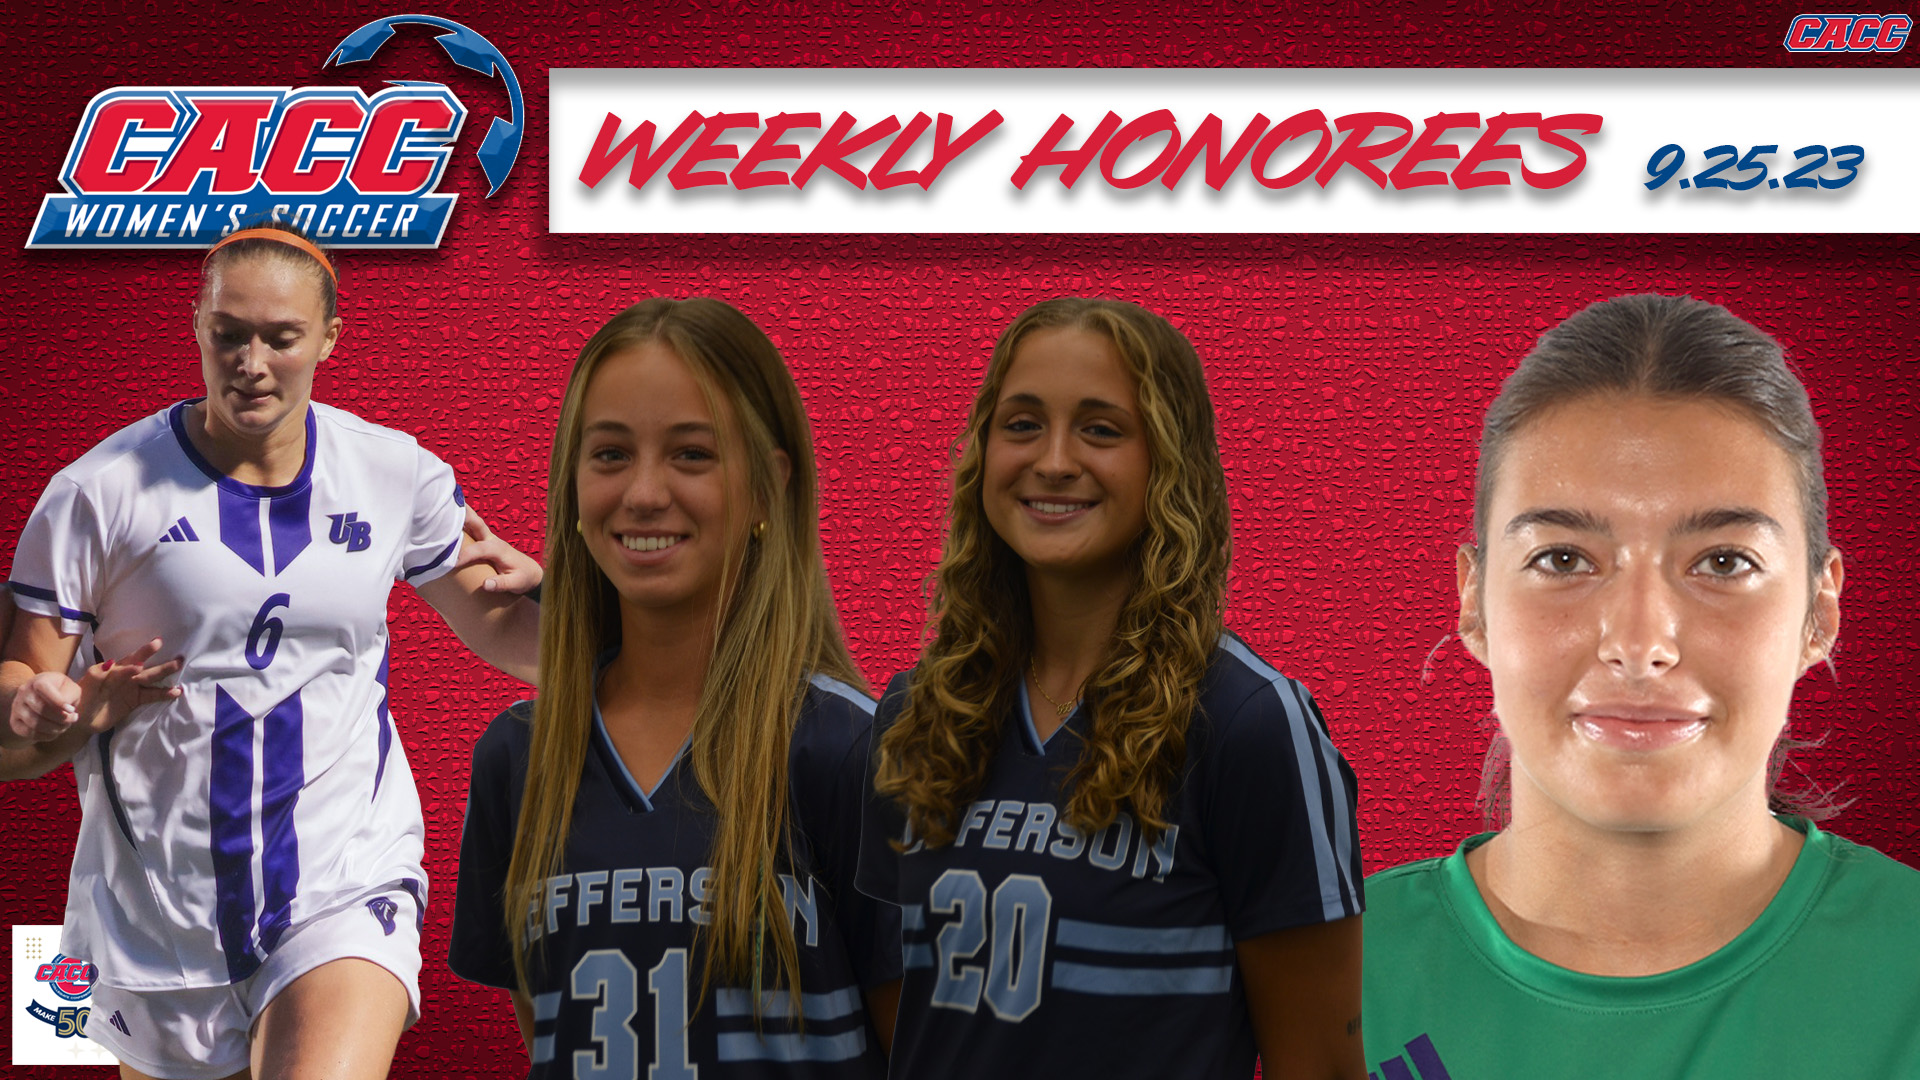 CACC Women's Soccer Weekly Honorees (9-25-23)